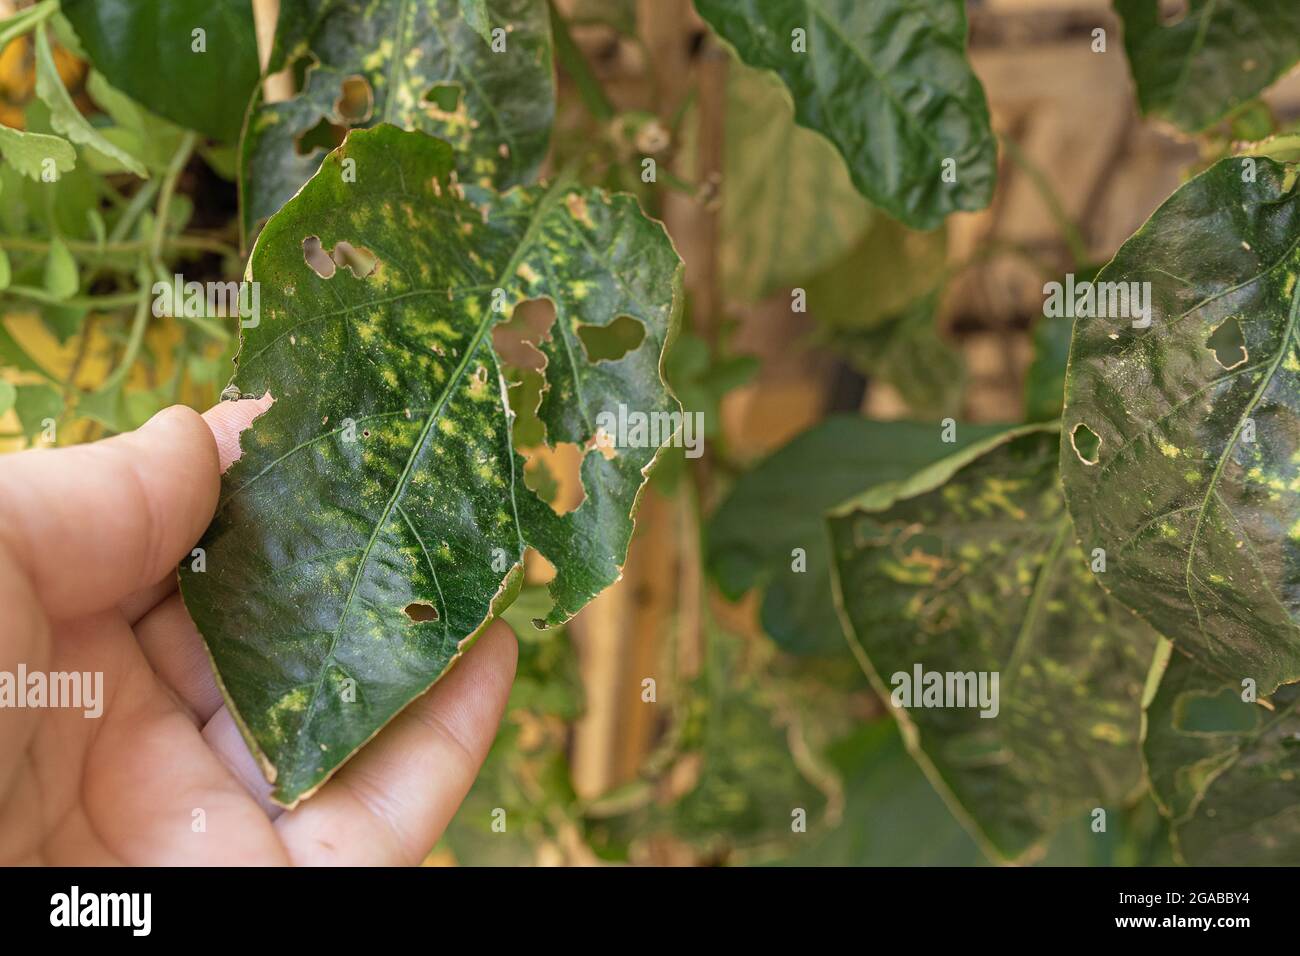 diseased pepper plant, with worms in leaves. Spoiled Sick Garden Pepper Leaf Stock Photo